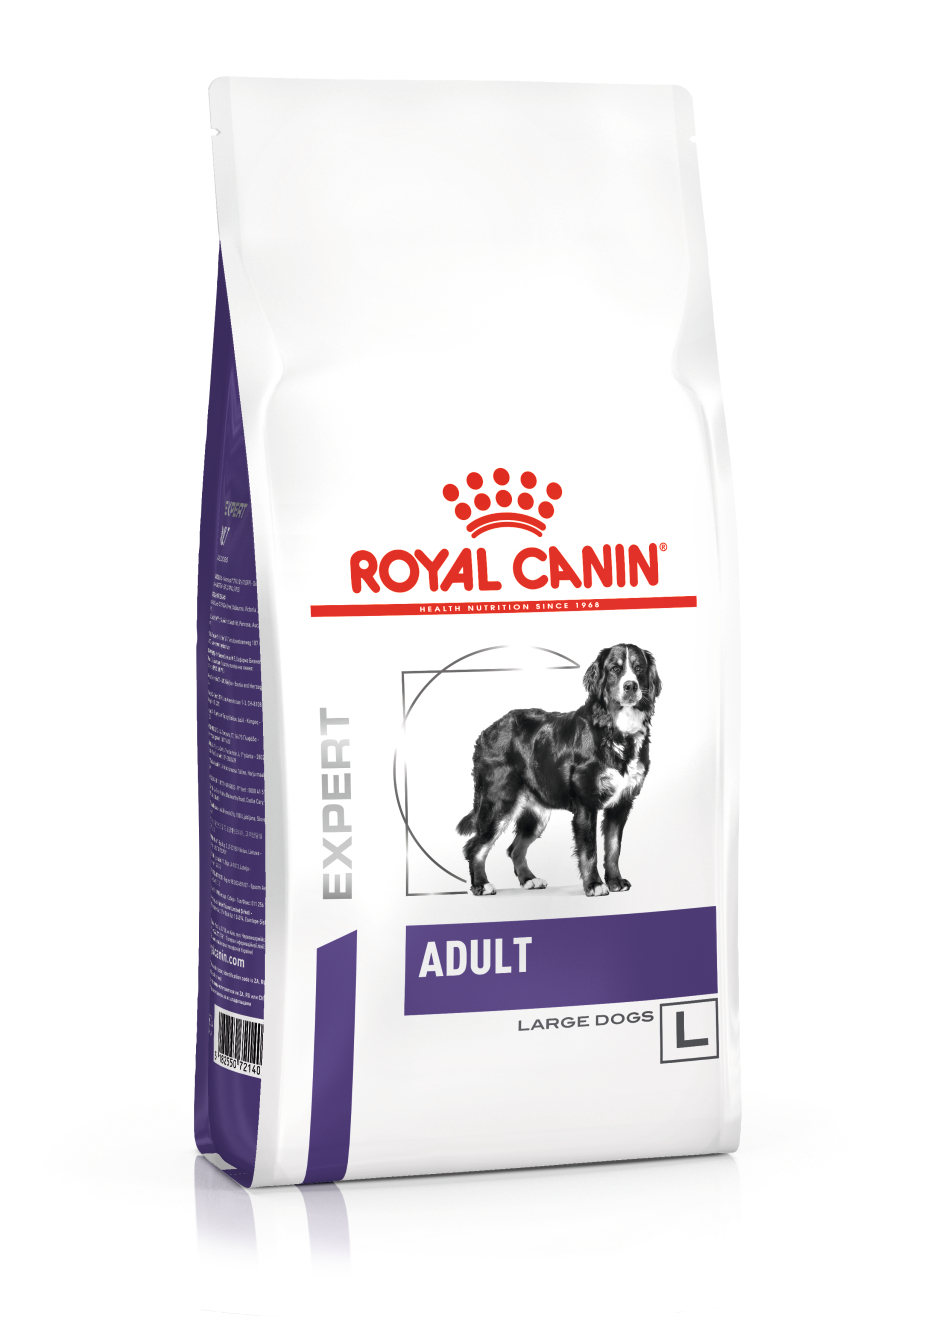 Royal Canin Expert Dog Adult Large pour grand chien